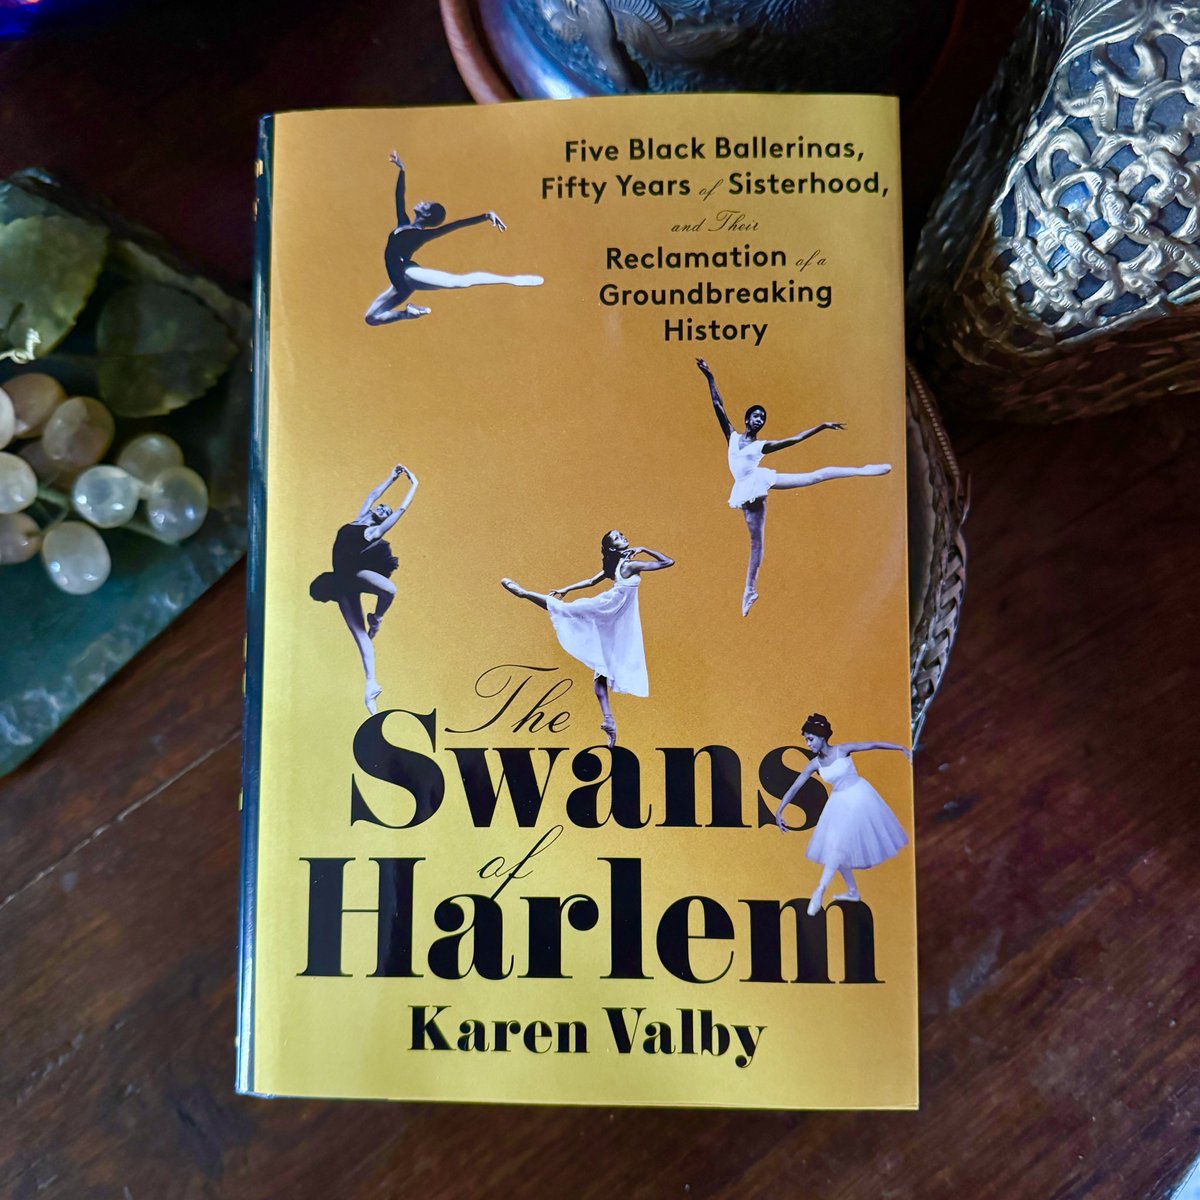 “The birth of a pioneering Black dance company comes alive in Karen Valby’s “The Swans of Harlem.”…The moral of this important and tear-stained book is actually a reminder: Bare oneself, fly into the grandest of jetés and live free.” -Danyel Smith, The New York Times